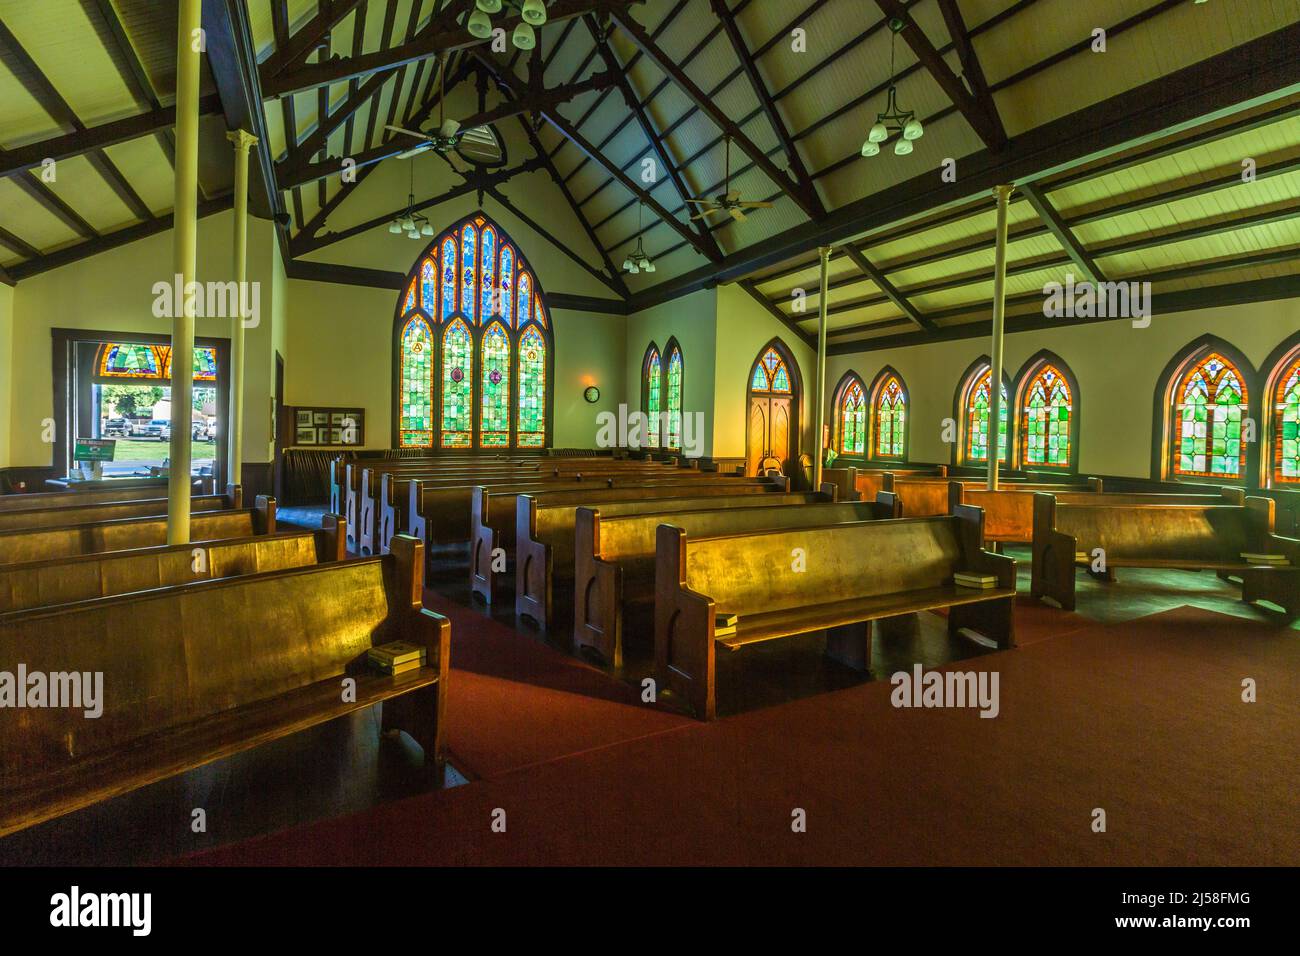 The interior of the historic Wai'oli Hui'ia Church in Hanalei, Kauai, Hawaii, built in 1912 to replace an earlier building and is the oldest church bu Stock Photo